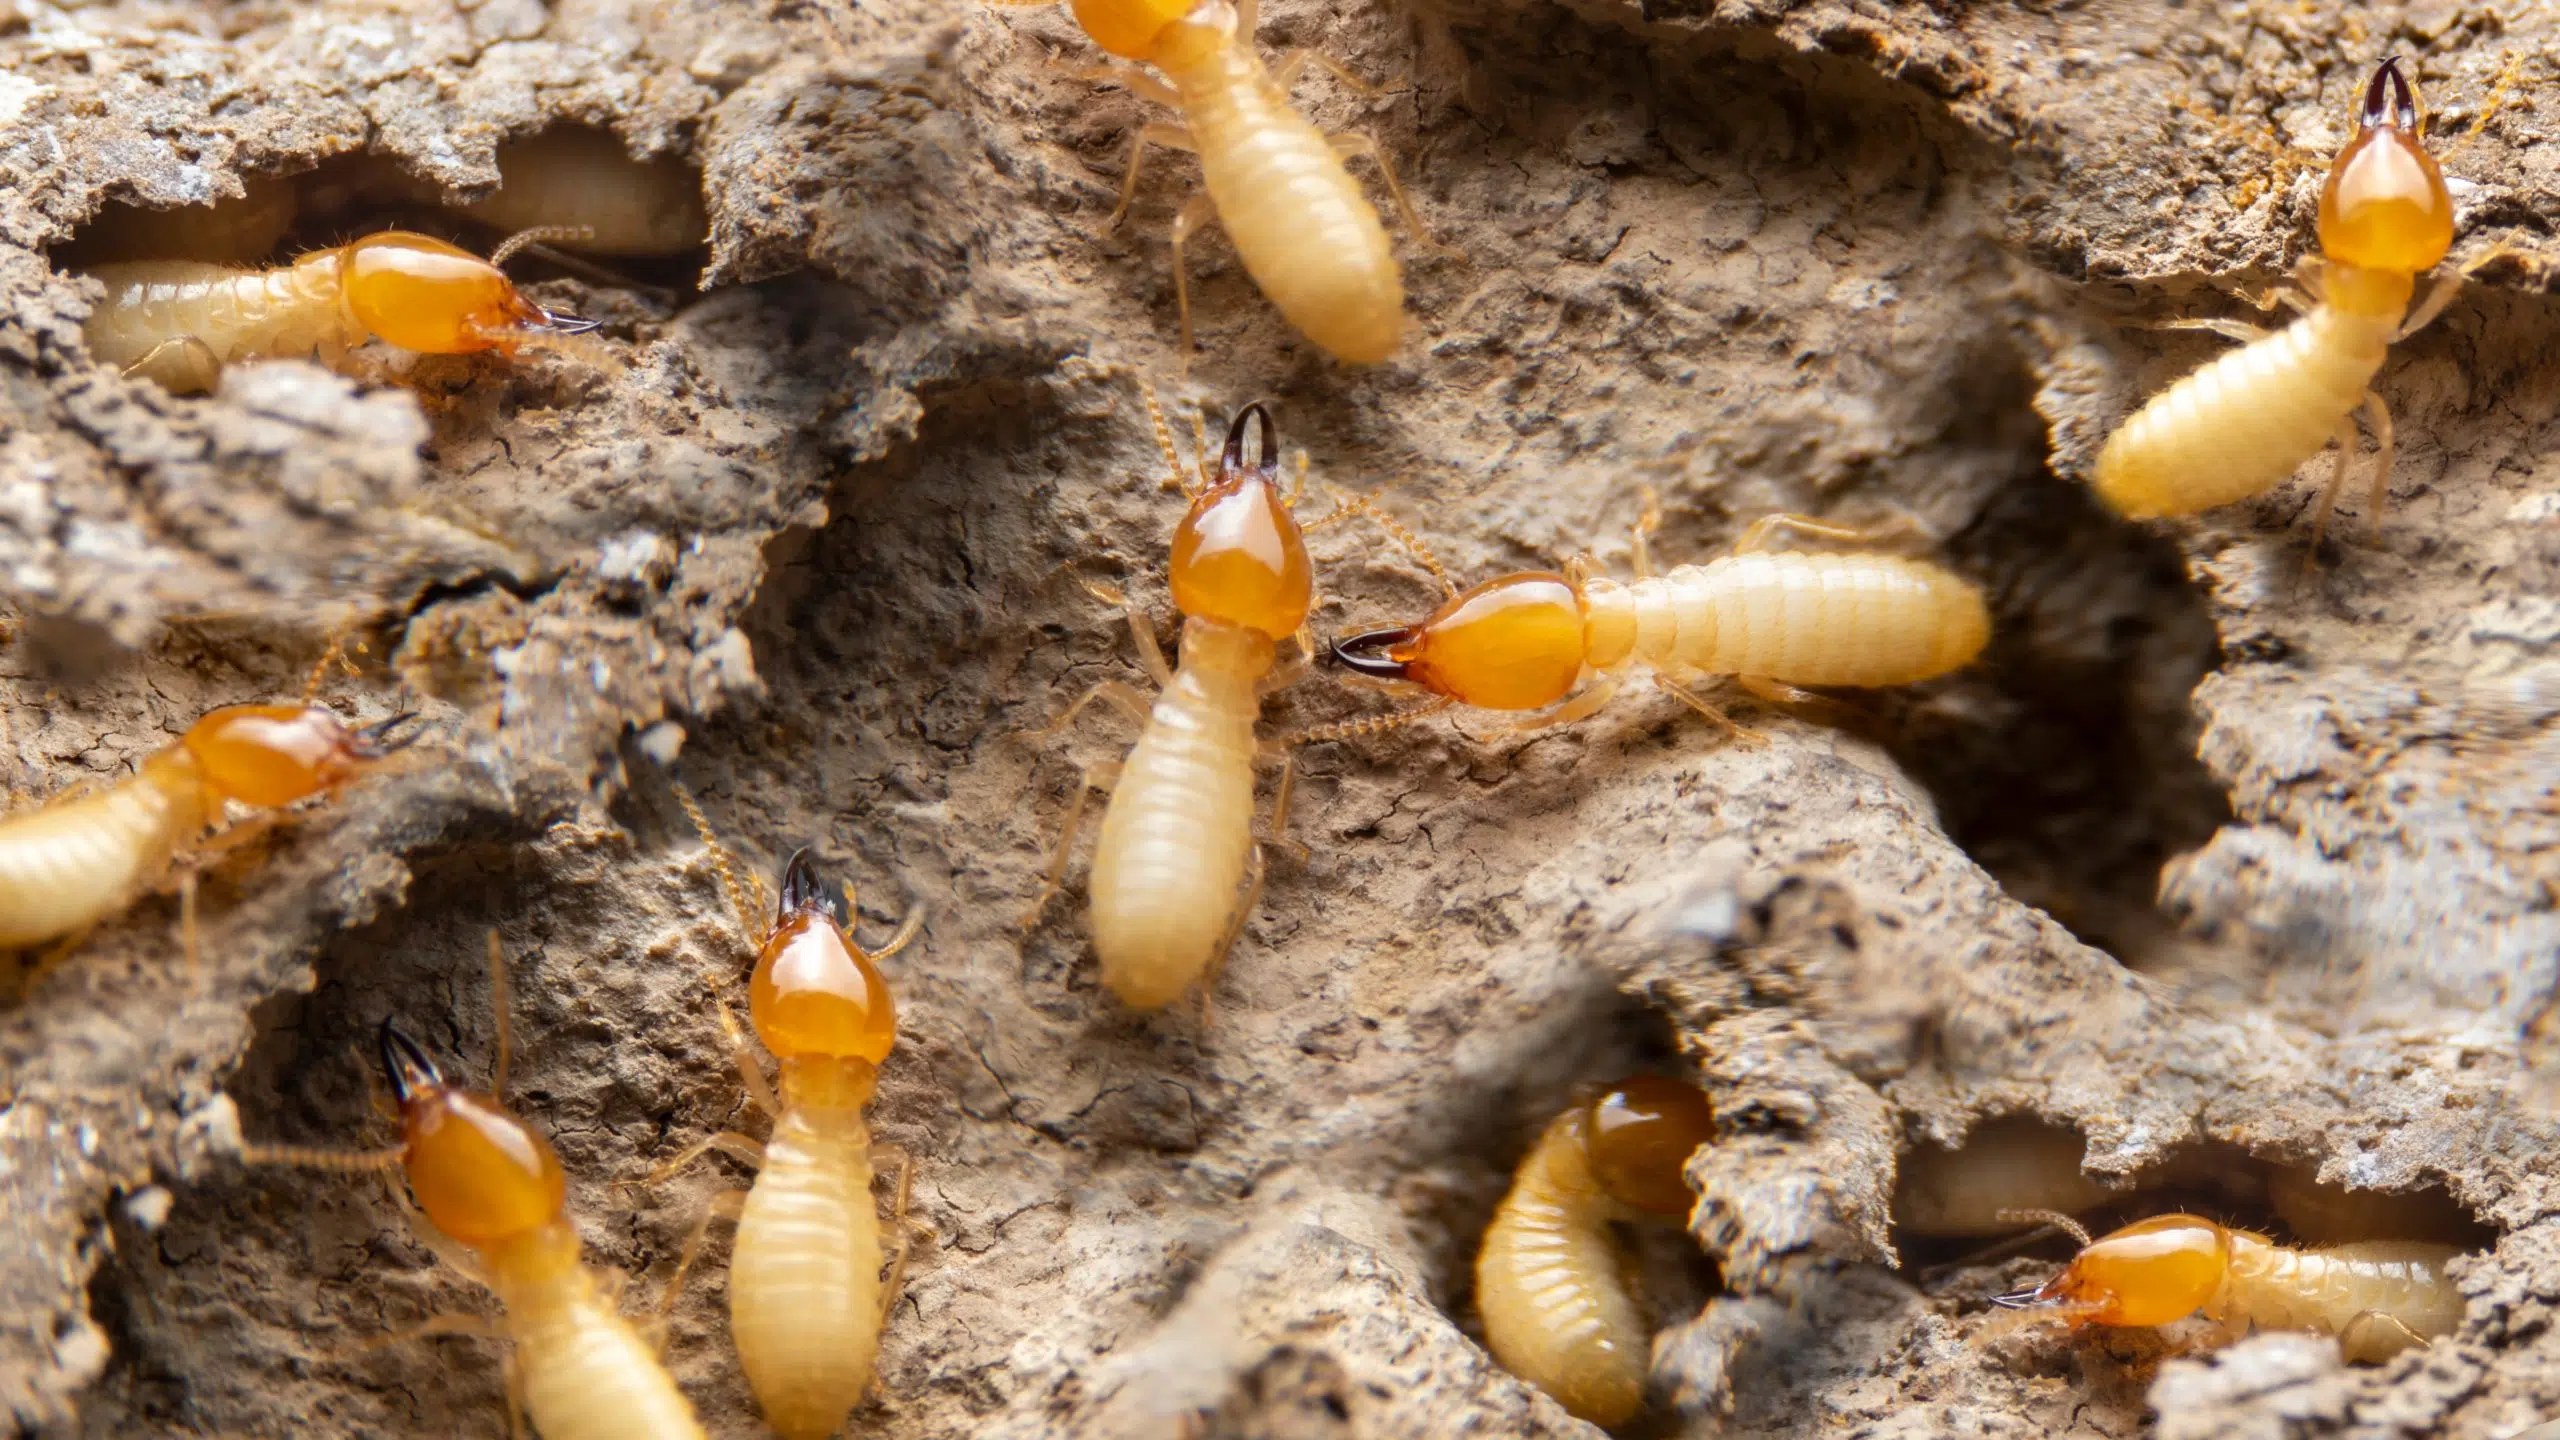 Council Votes in Favour of Moving Forward With a Termite Management Proposal Request